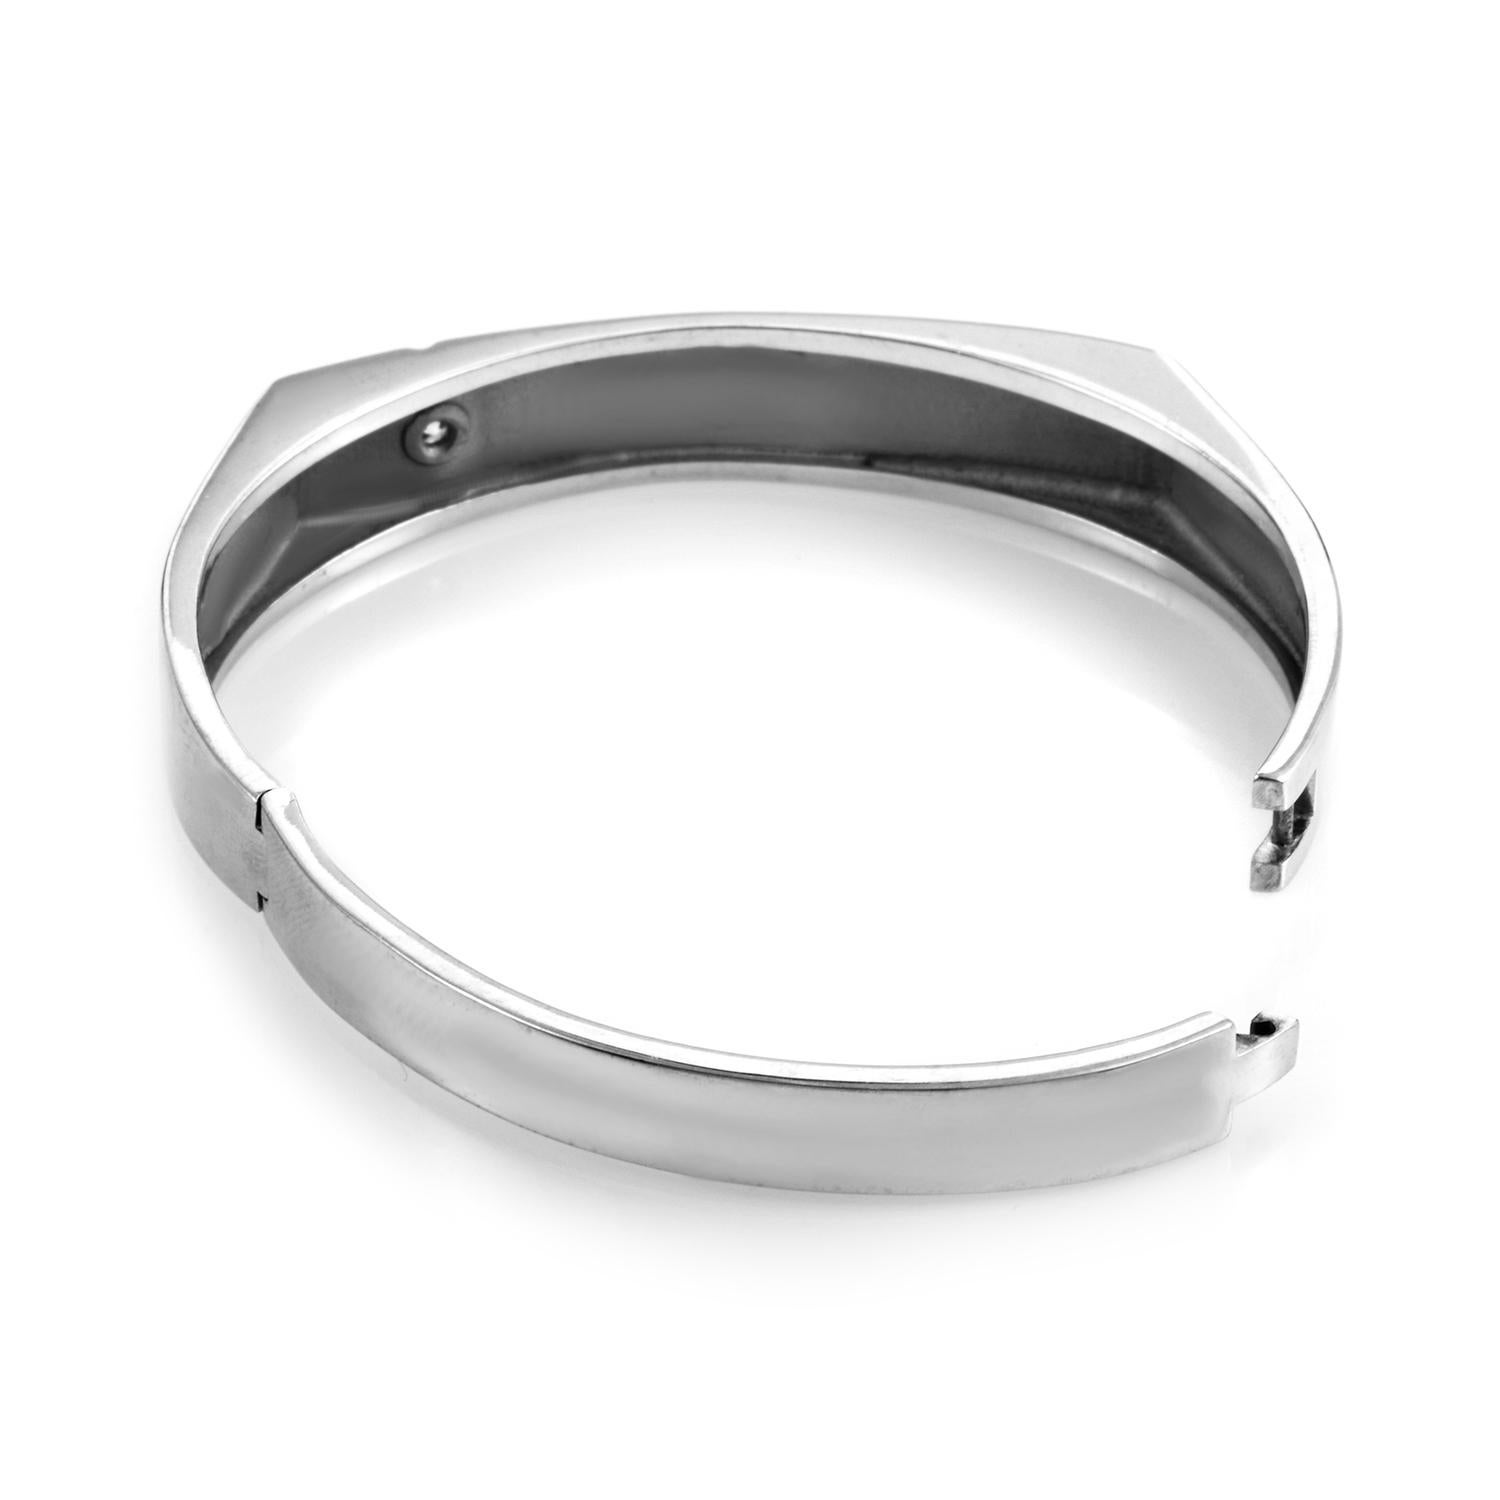 Modern Gents bracelet in 18K White Gold and diamonds from Hearts on Fire. <br />The polished white gold has a squared off center design with one diamondbezel set off to the side. <br />The bracelet has an easy opening and this allows the bracelet to